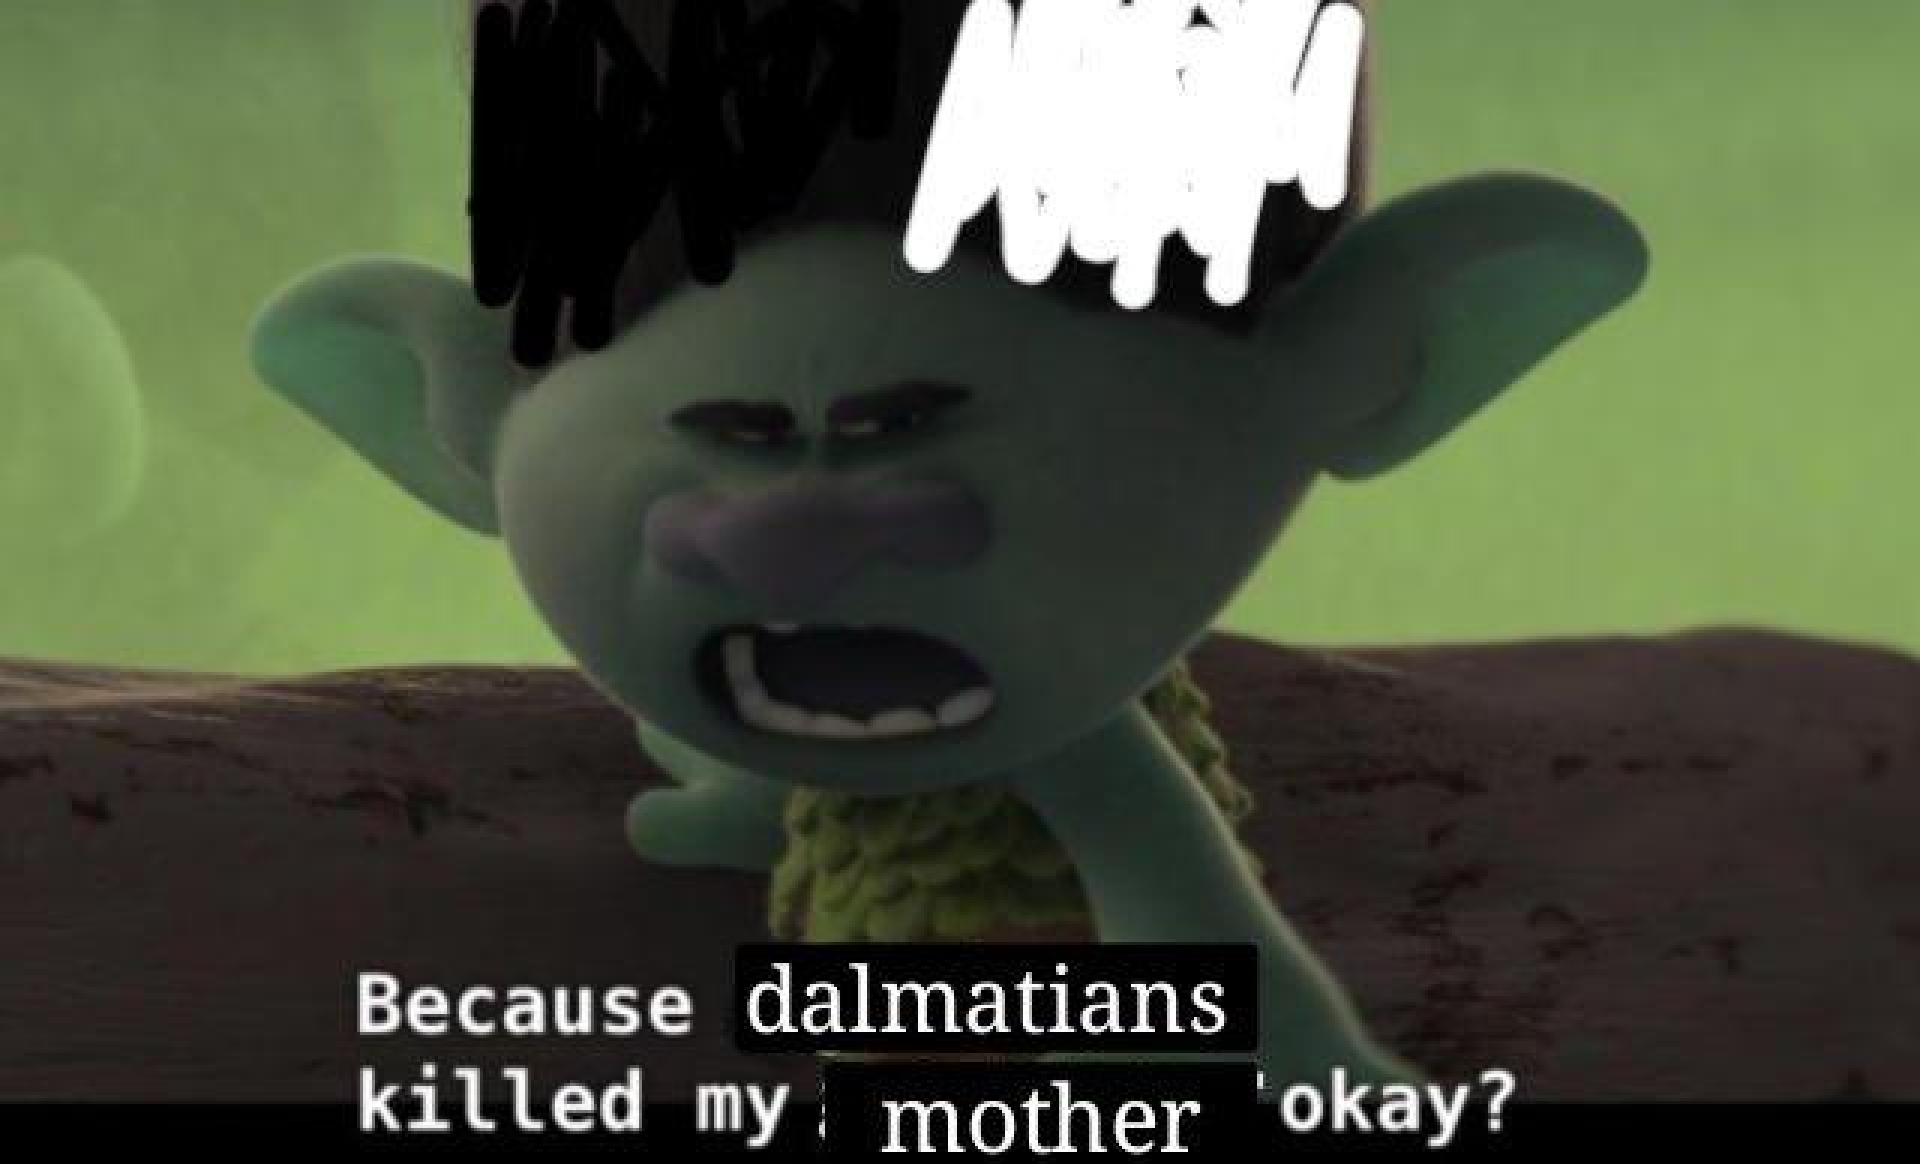 "Because dalmations killed my mother, okay?" meme.